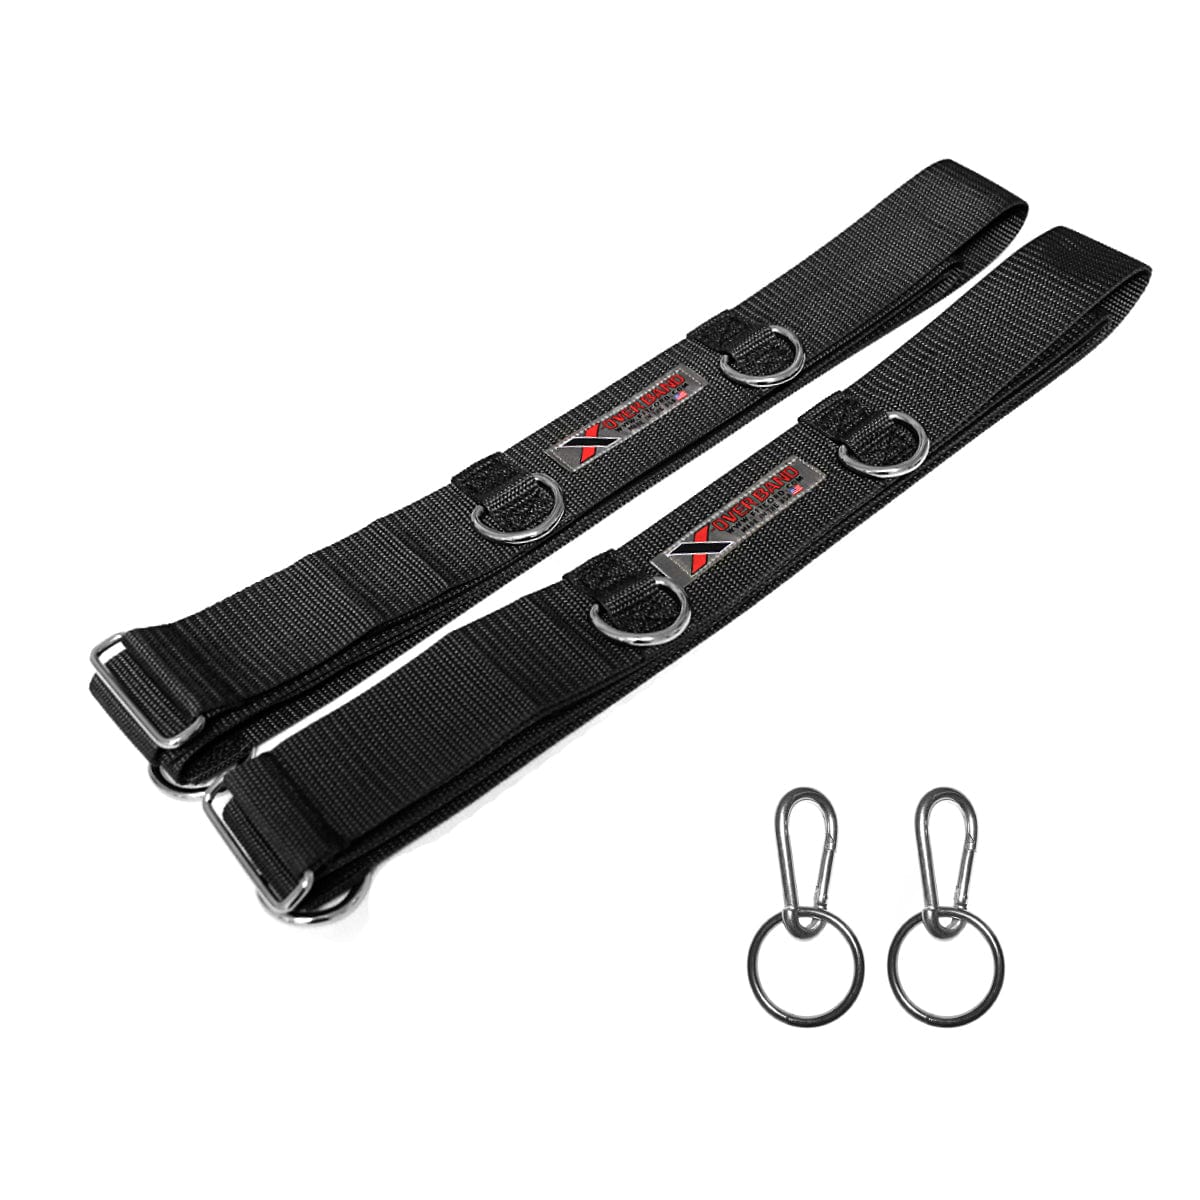 Full Door Wrapping belts for resistance band anchors. Comes in a set of 2 belts with heavy duty velcro and 3 D rings for easy adjustment. Fits small to large door sizes, will not move during use or damage the door in any way. Best Clip resistance band Door Anchor sold on the internet.